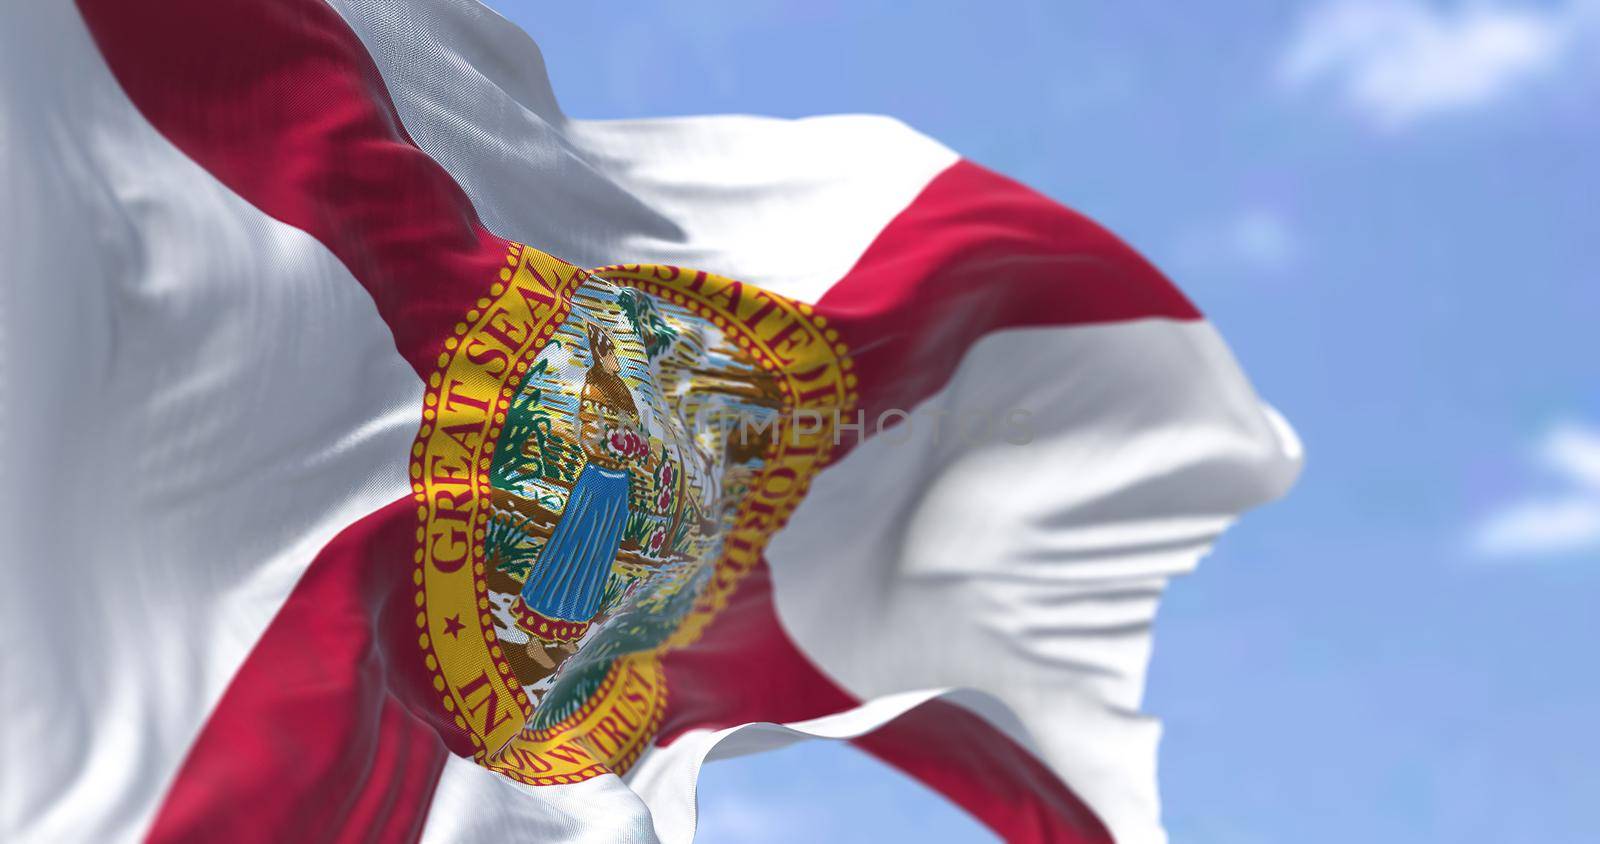 The state flag of Florida waving in the wind by rarrarorro